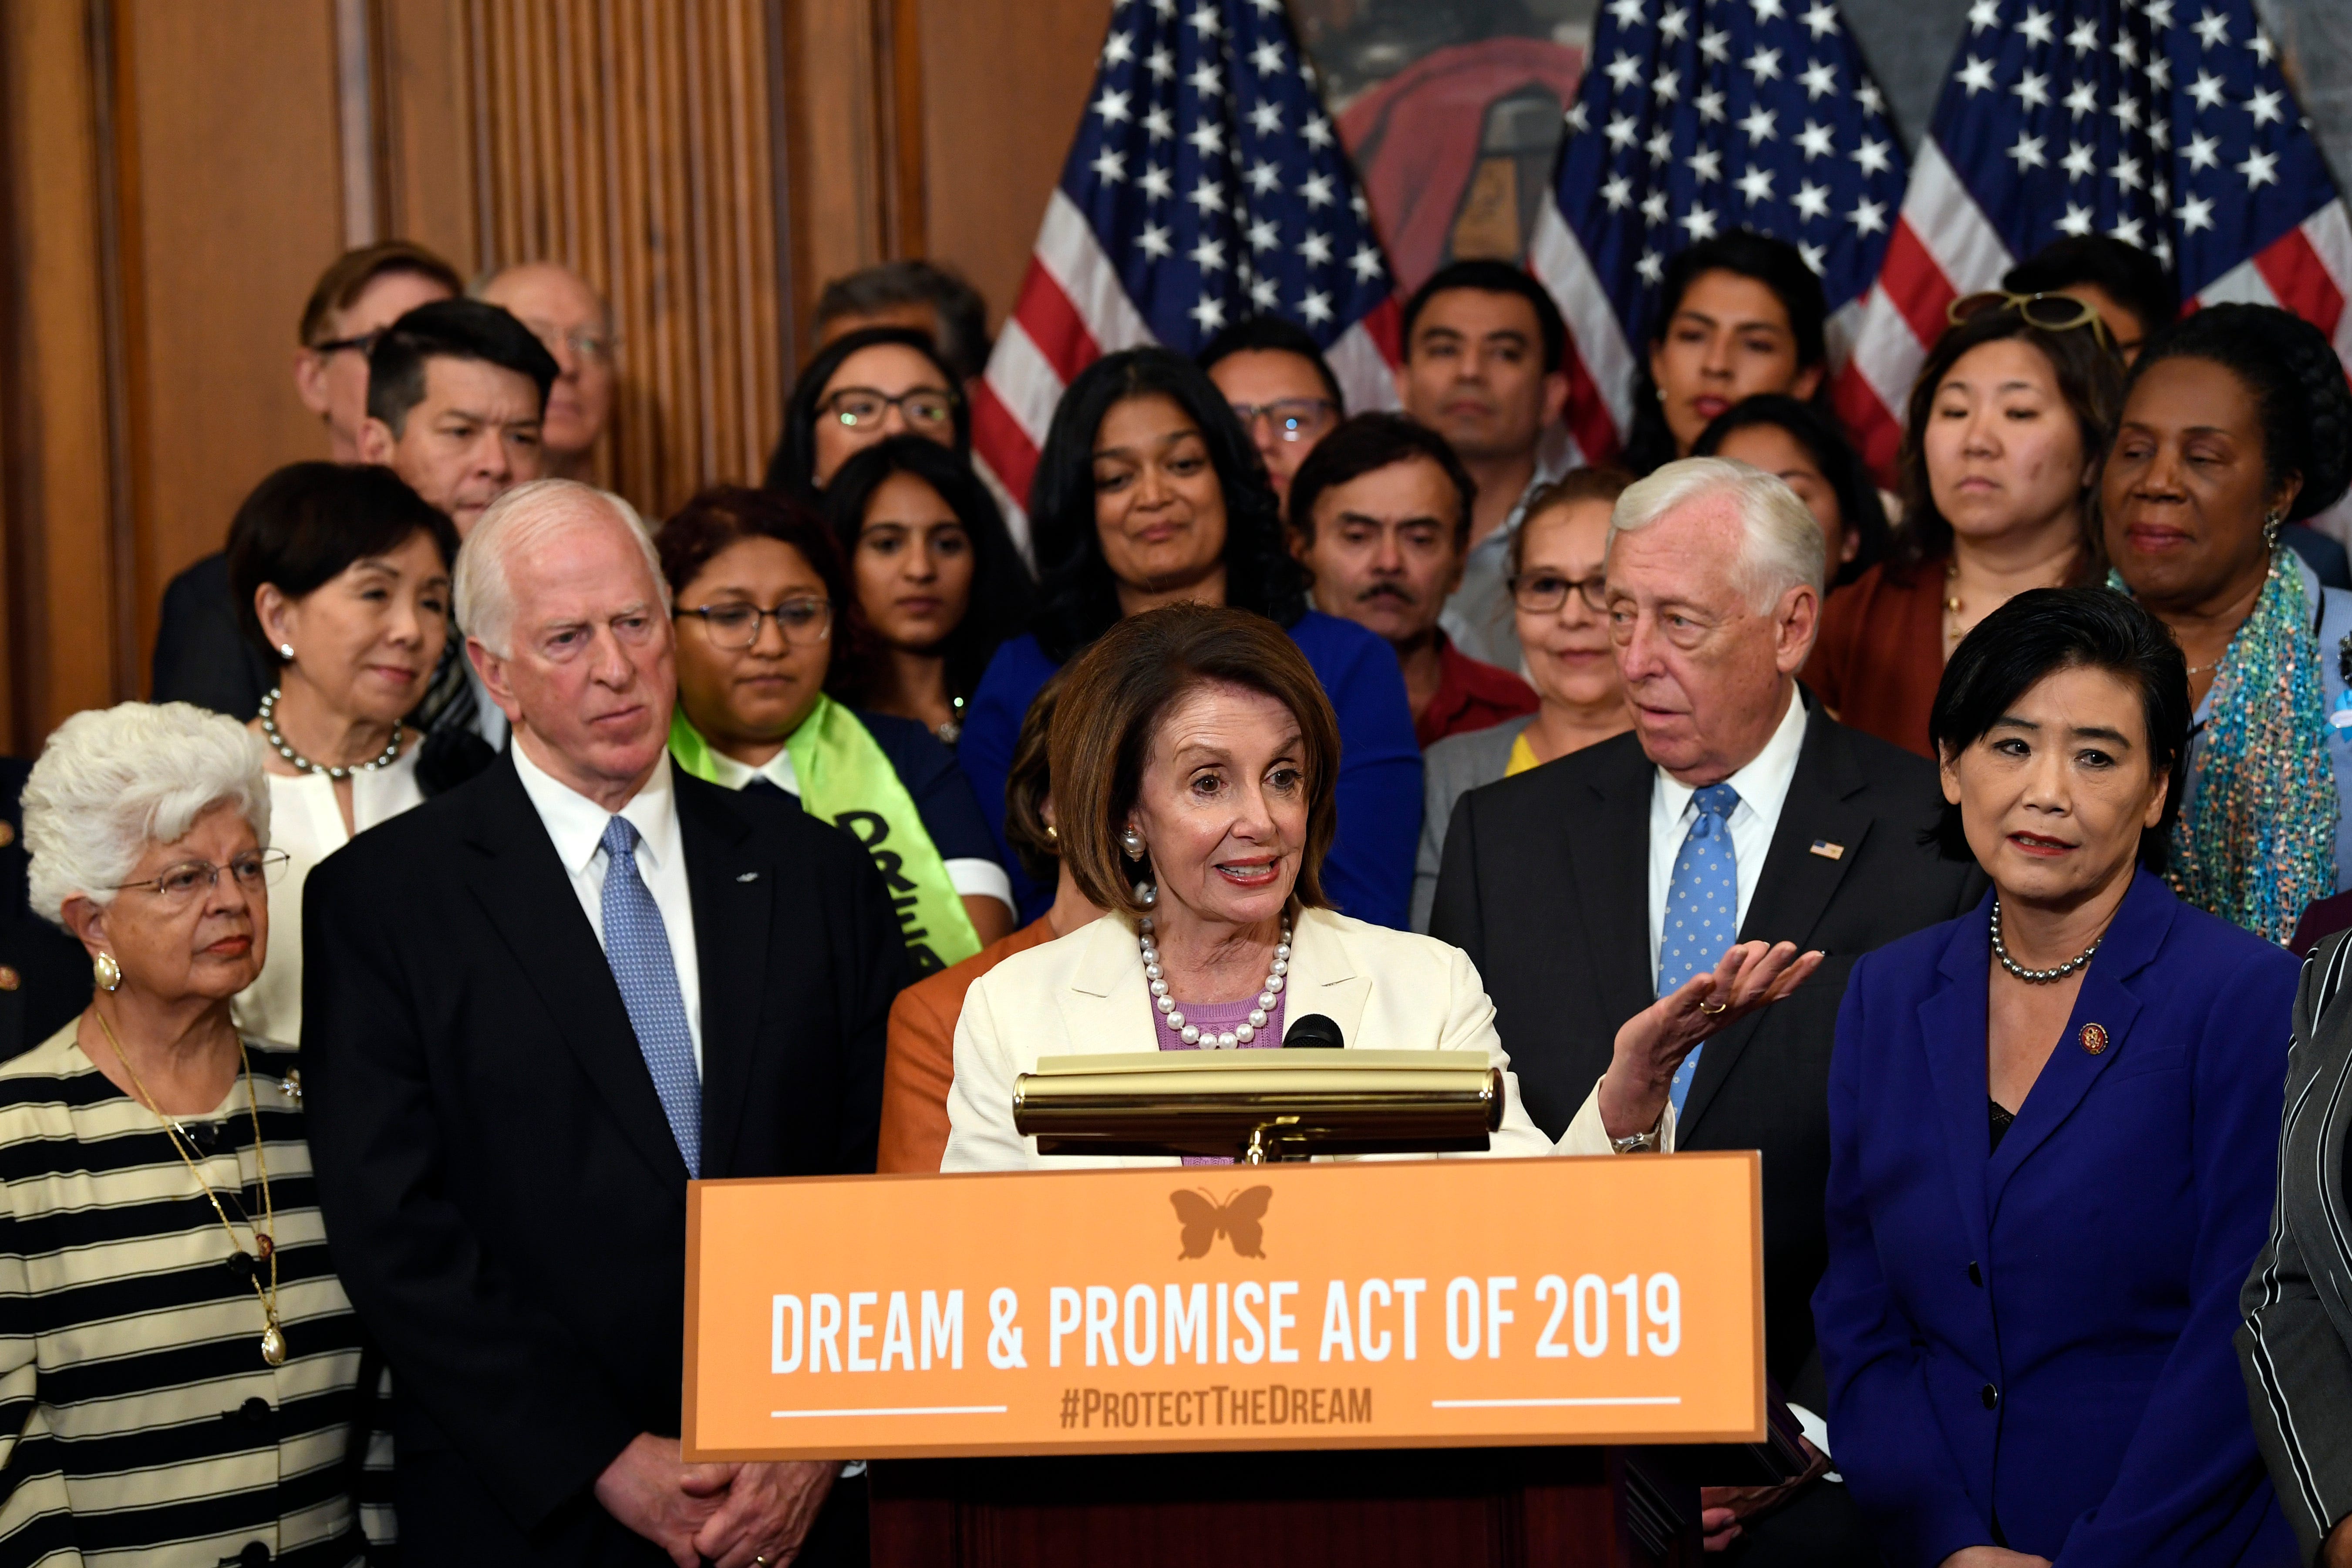 House Speaker Nancy Pelosi of Calif., speaks during an event on Capitol Hill in Washington, Tuesday, June 4, 2019, with those with Deferred Action for Childhood Arrivals (DACA), Temporary Protected Status (TPS) and Deferred Enforced Departure (DED) and similarly situated immigrants who have spent much of their lives in the United States.